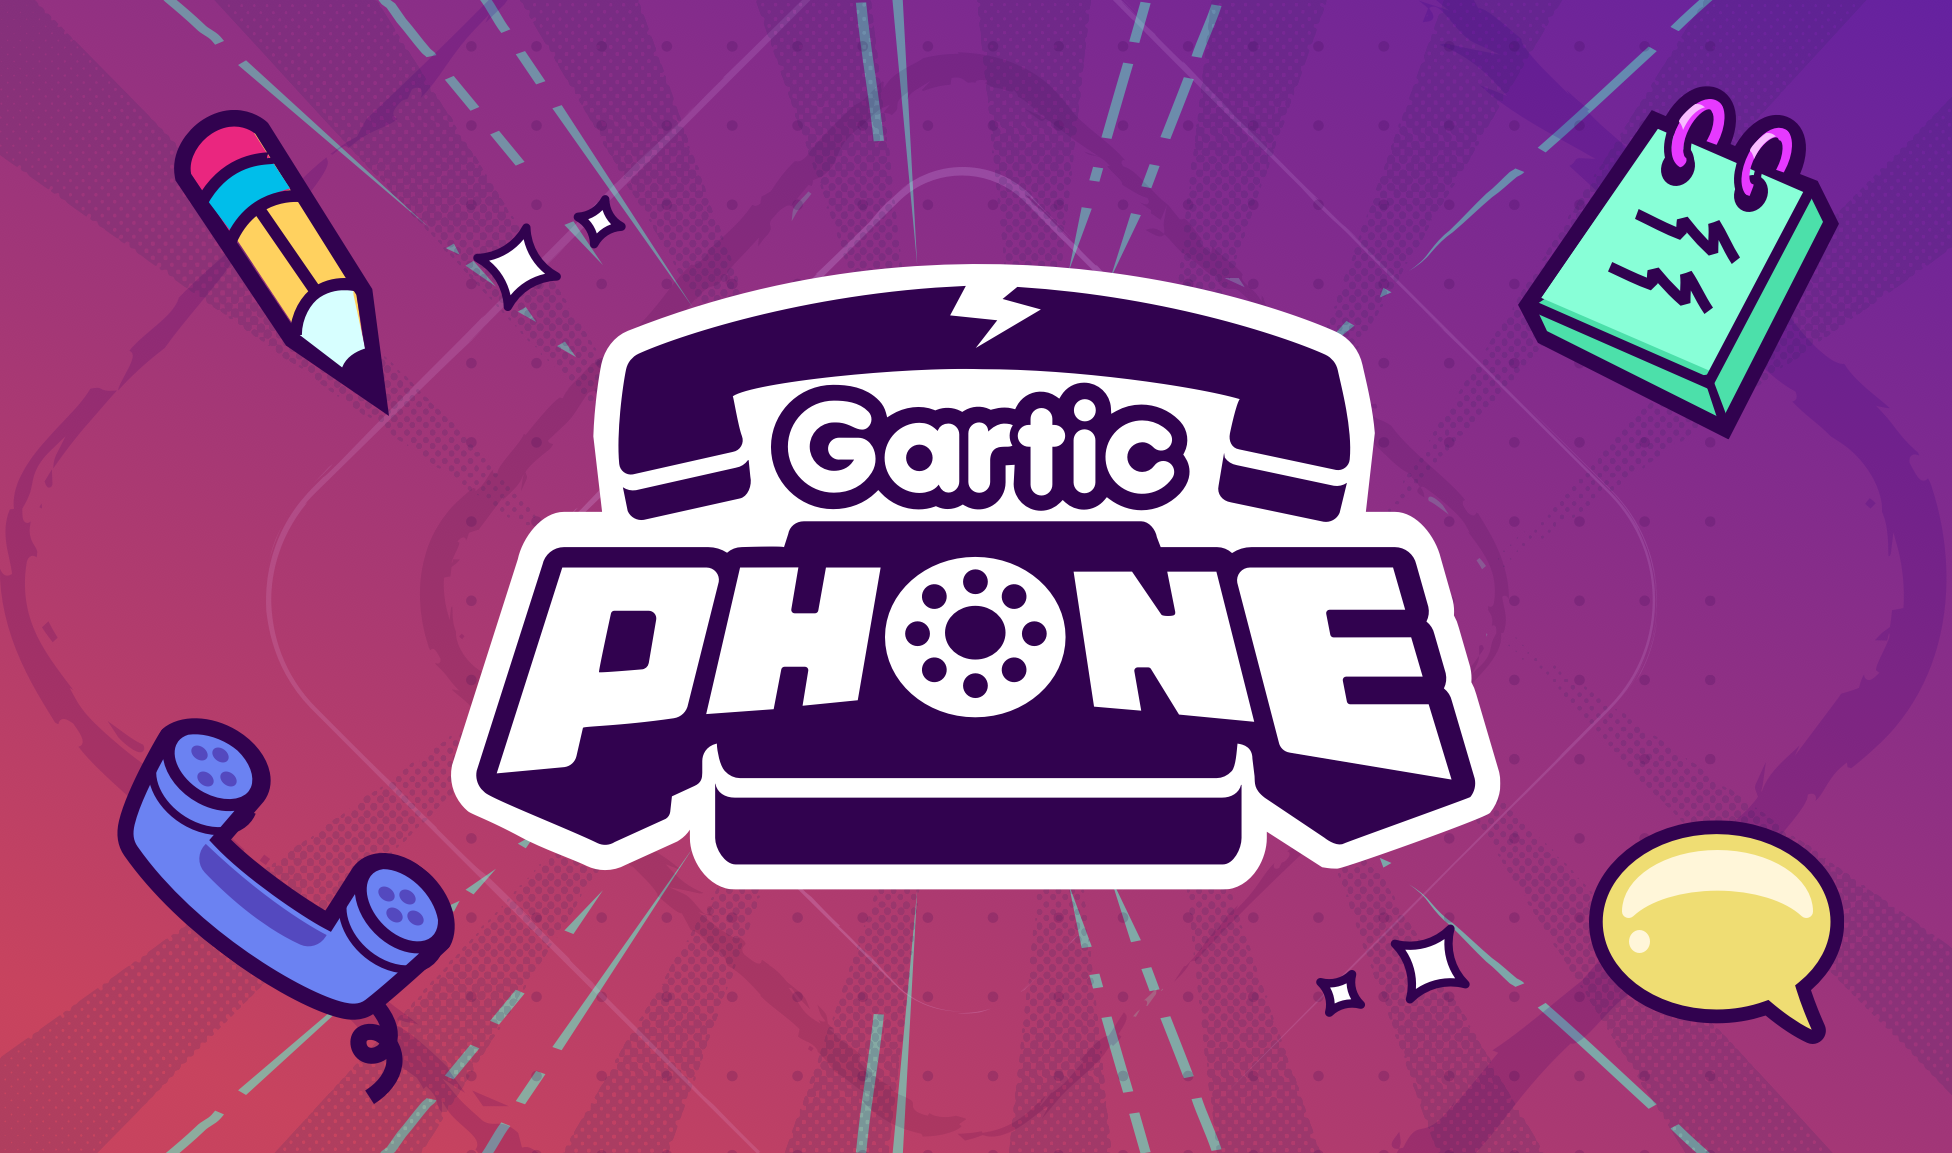 Gartic Phone time!!! And also maybe Jackbox